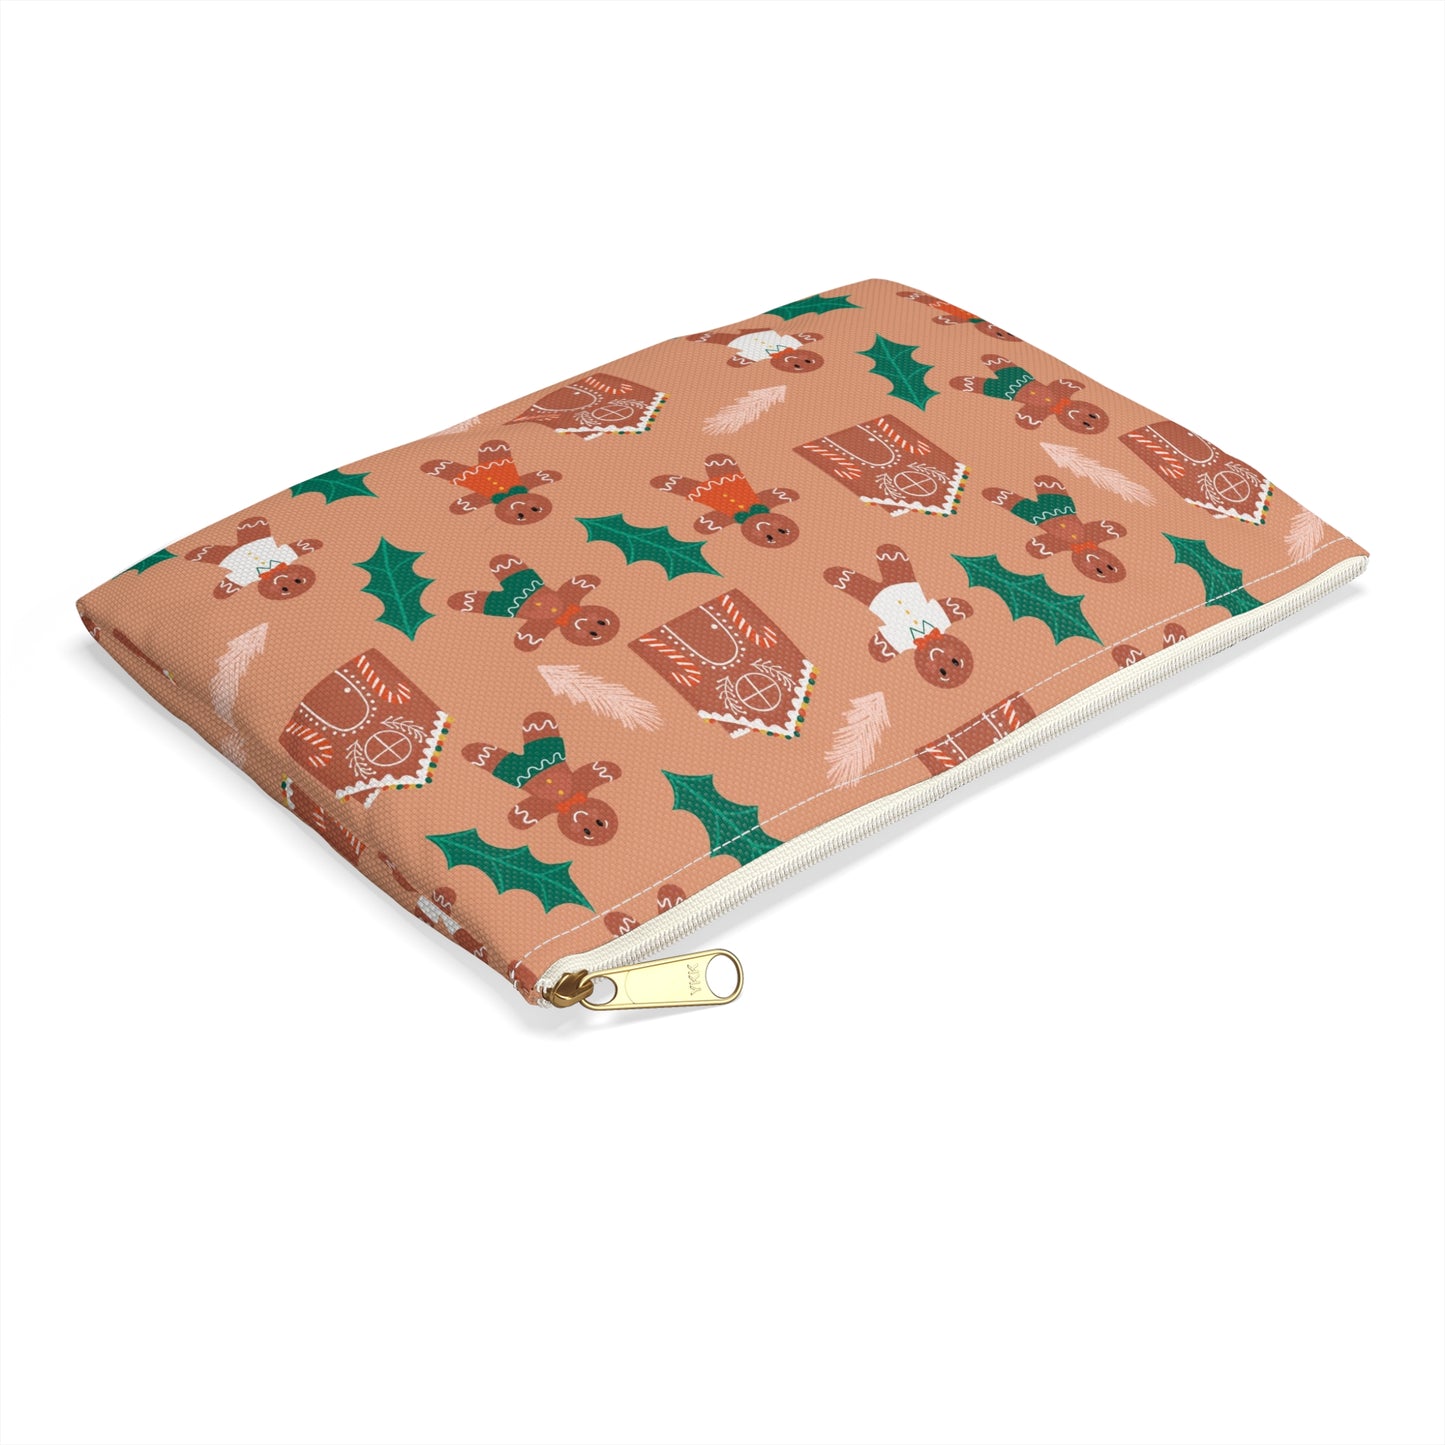 Gingerbread Kisses Planner Pouch